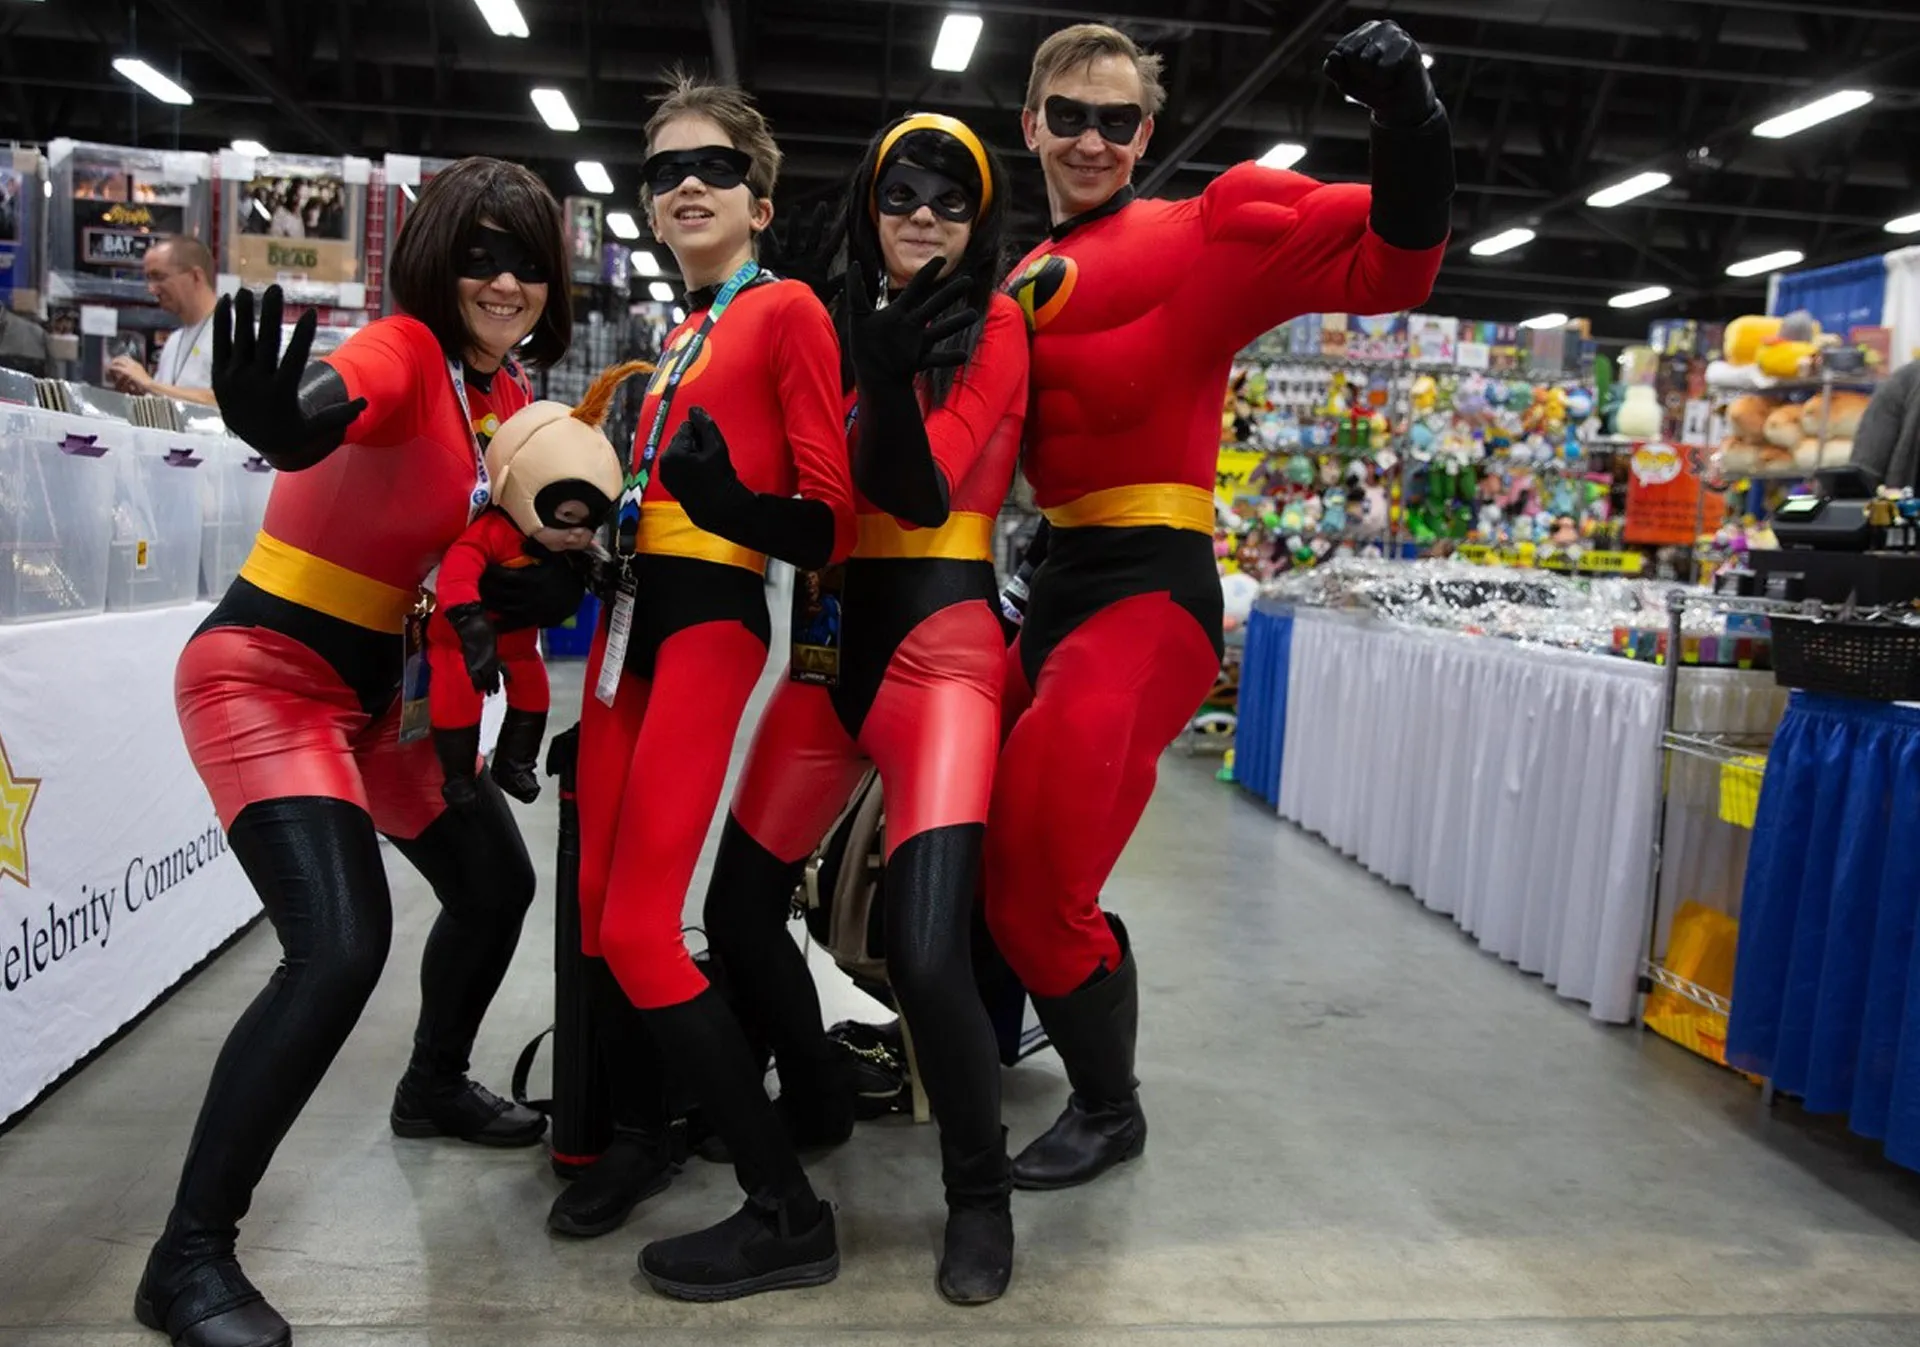 Calgary Comics &amp; Entertainment Expo is a family friendly event.